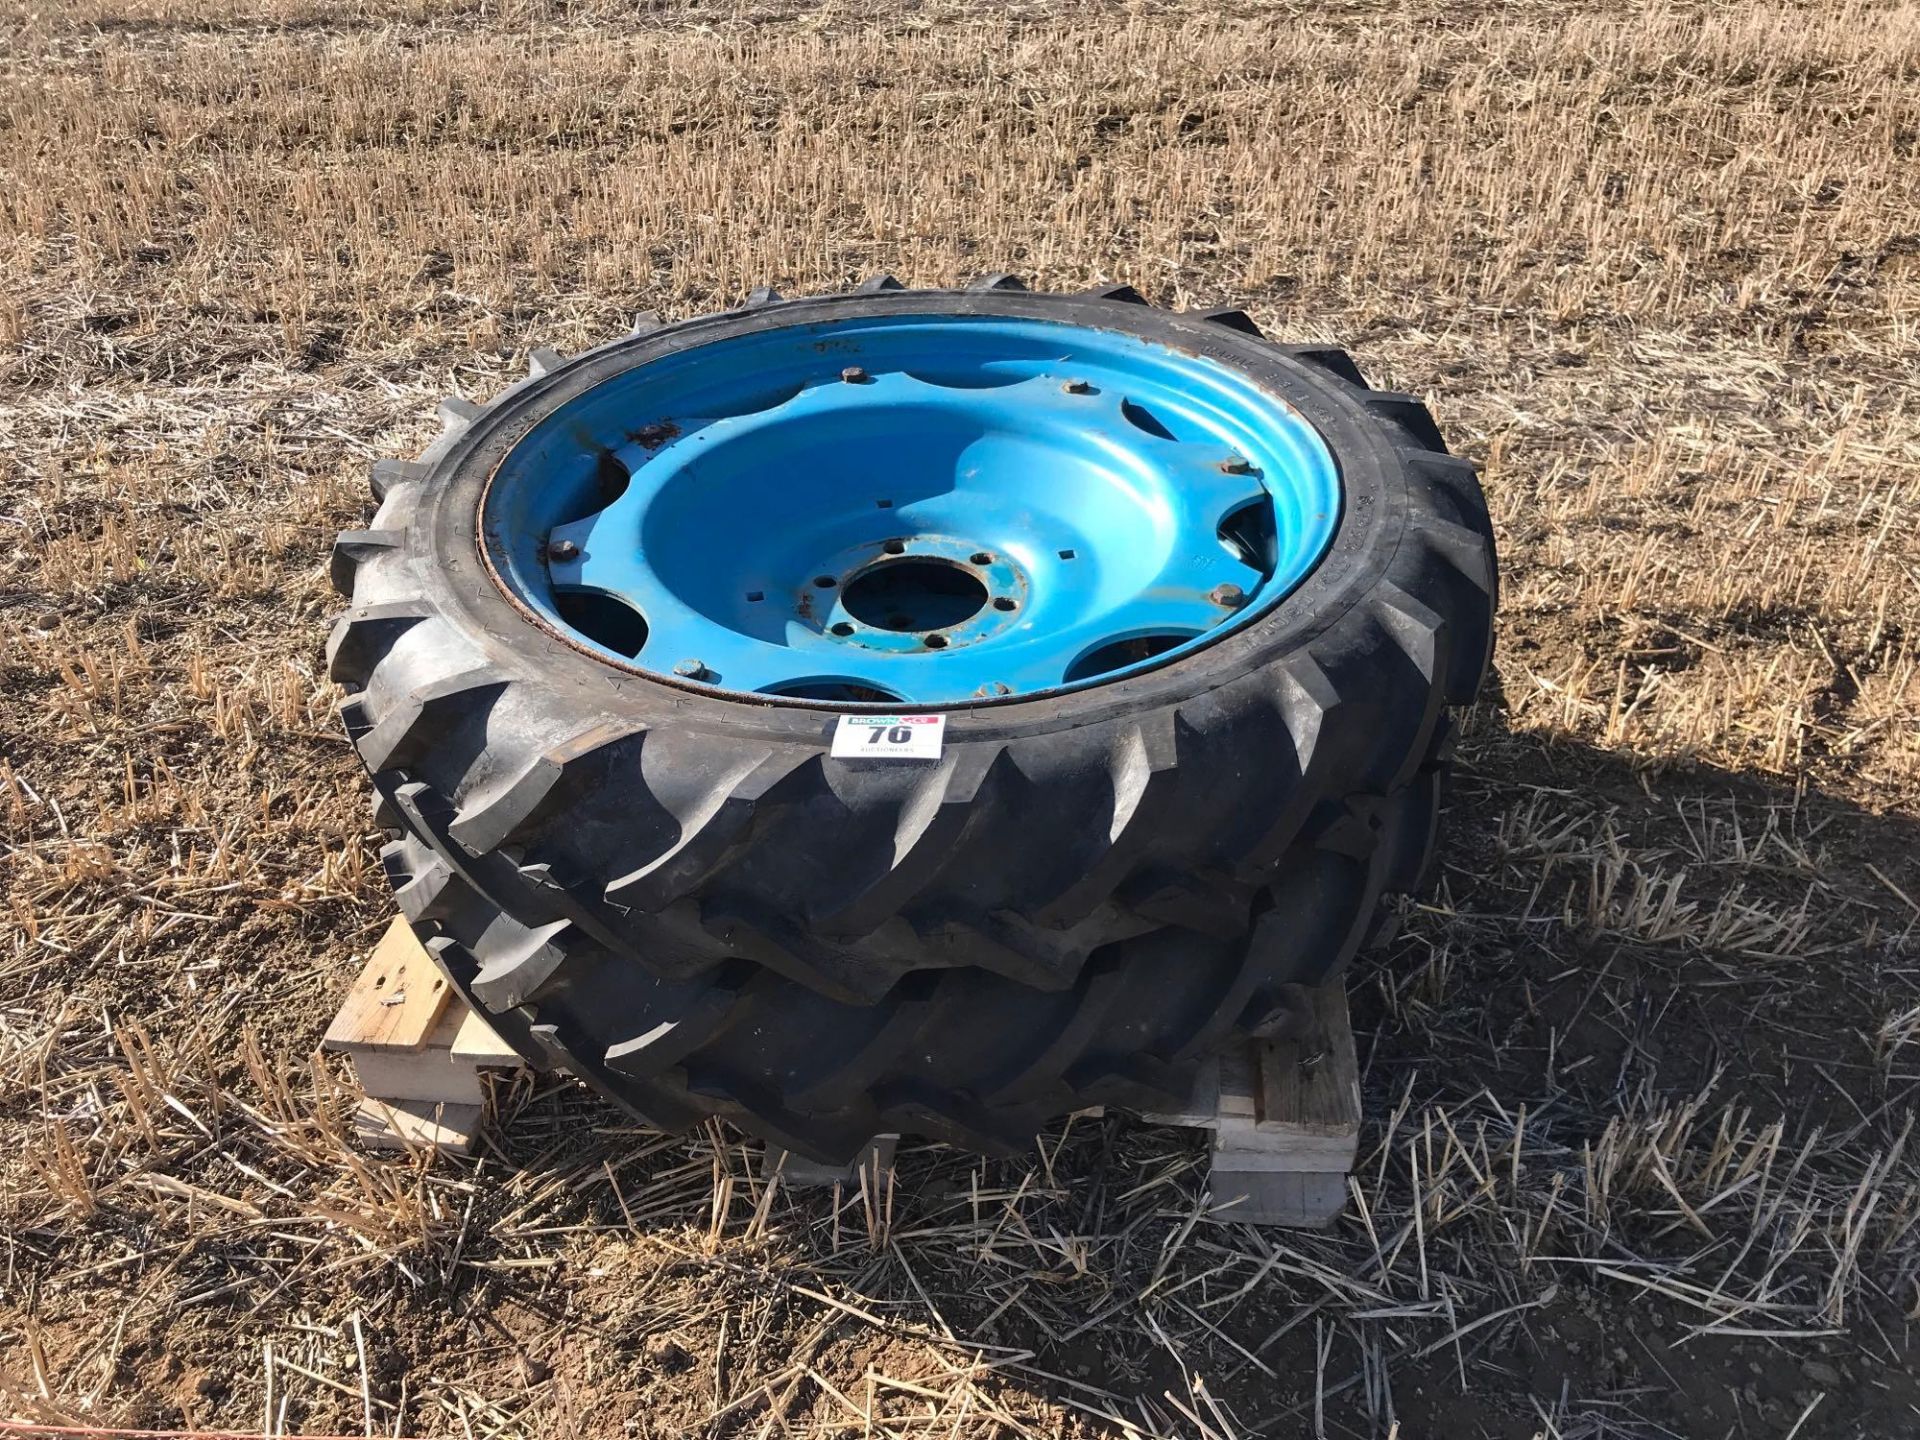 Pair of Kleber 8.3/8R32 row crop wheels and tyres with 6 stud centres